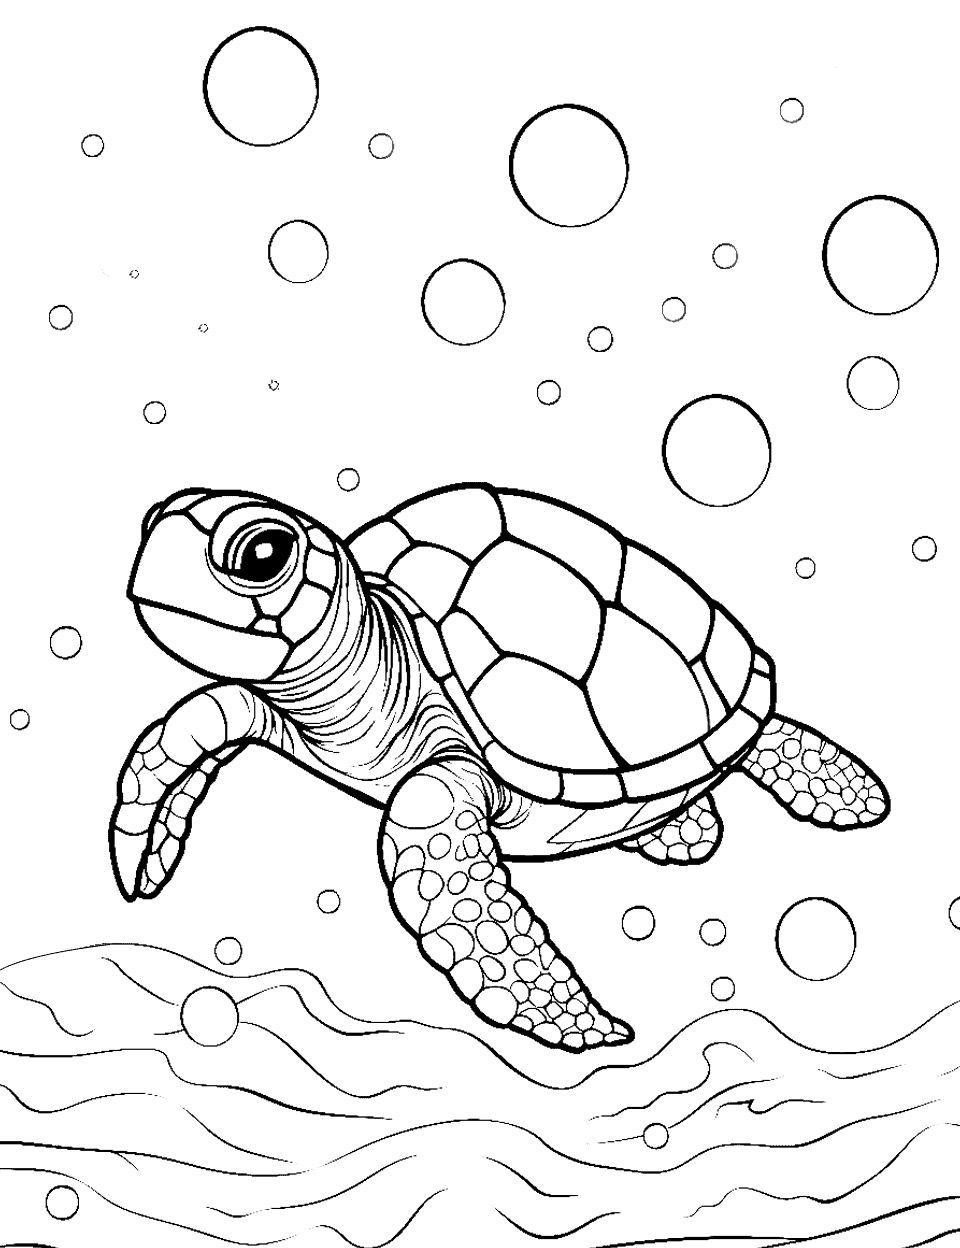 Turtle's Bubble Play Turtle Coloring Page - A turtle surrounded by floating bubbles.